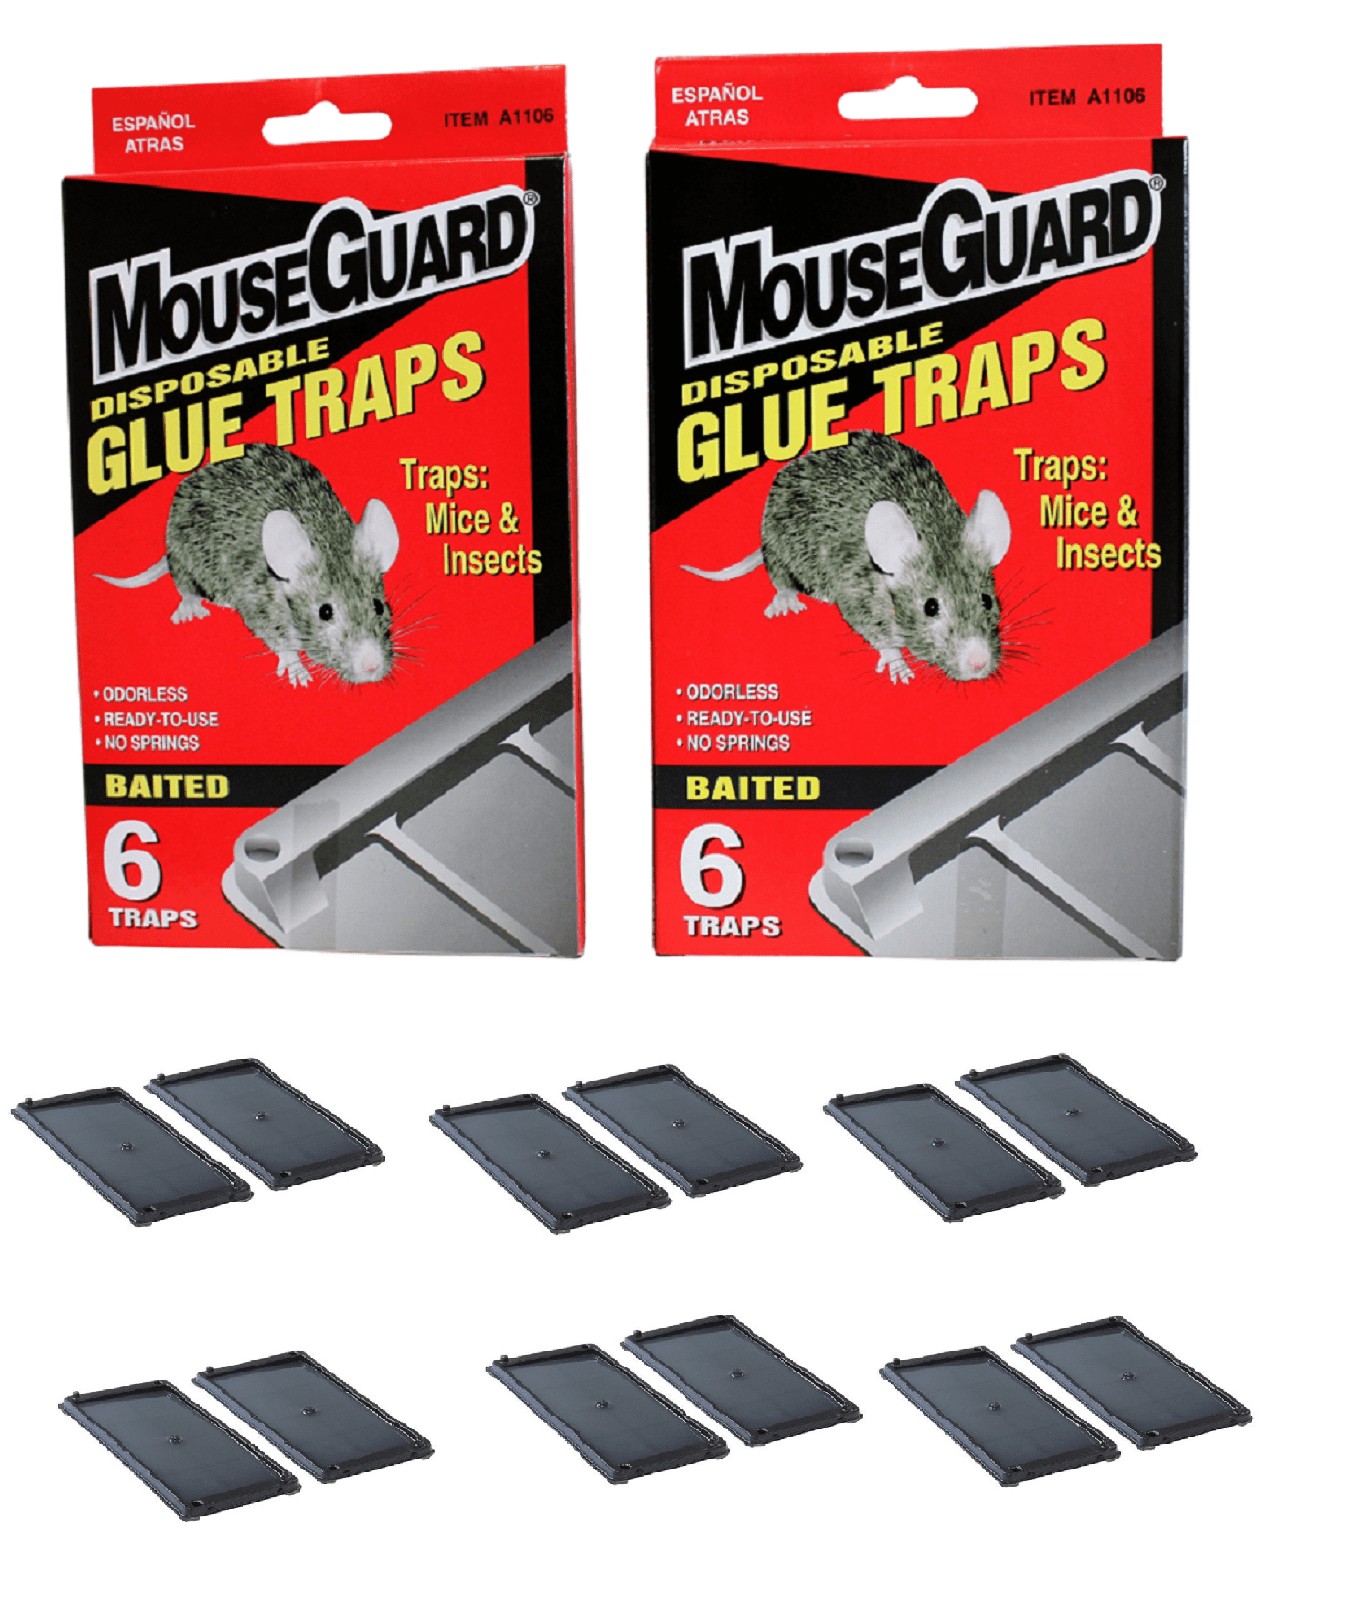 Mouse Guard 12 Pack Ready-to-Use Odorless Mouse Glue Traps for Trapping  Mice Rodents Insects with No Springs Disposable Safe